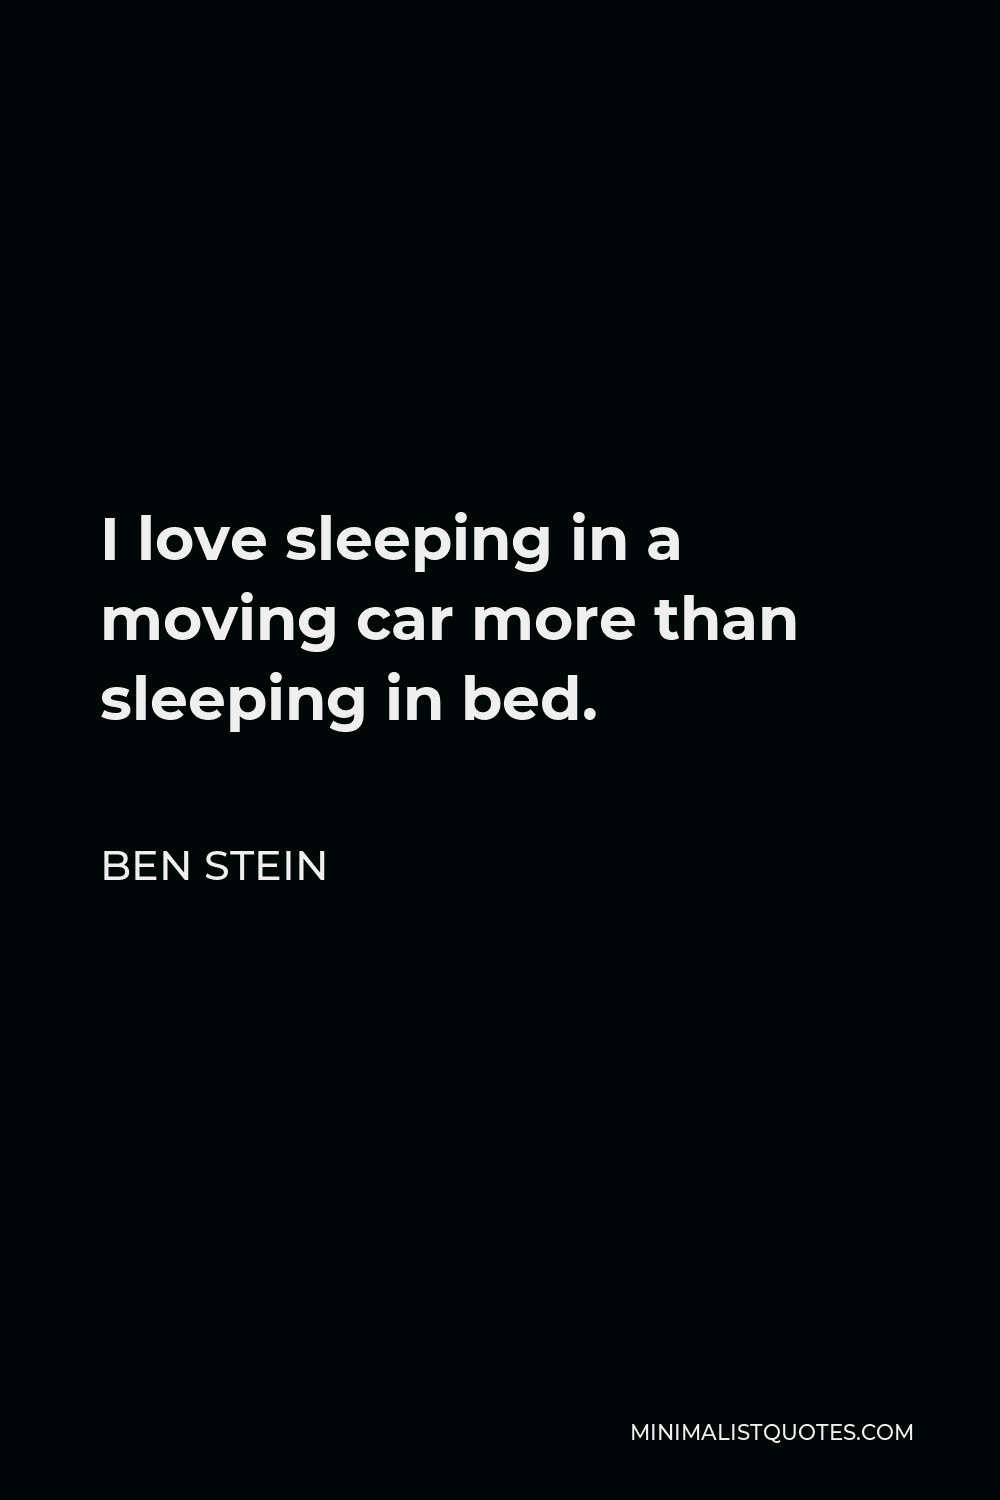 Ben Stein Quote - I love sleeping in a moving car more than sleeping in bed.